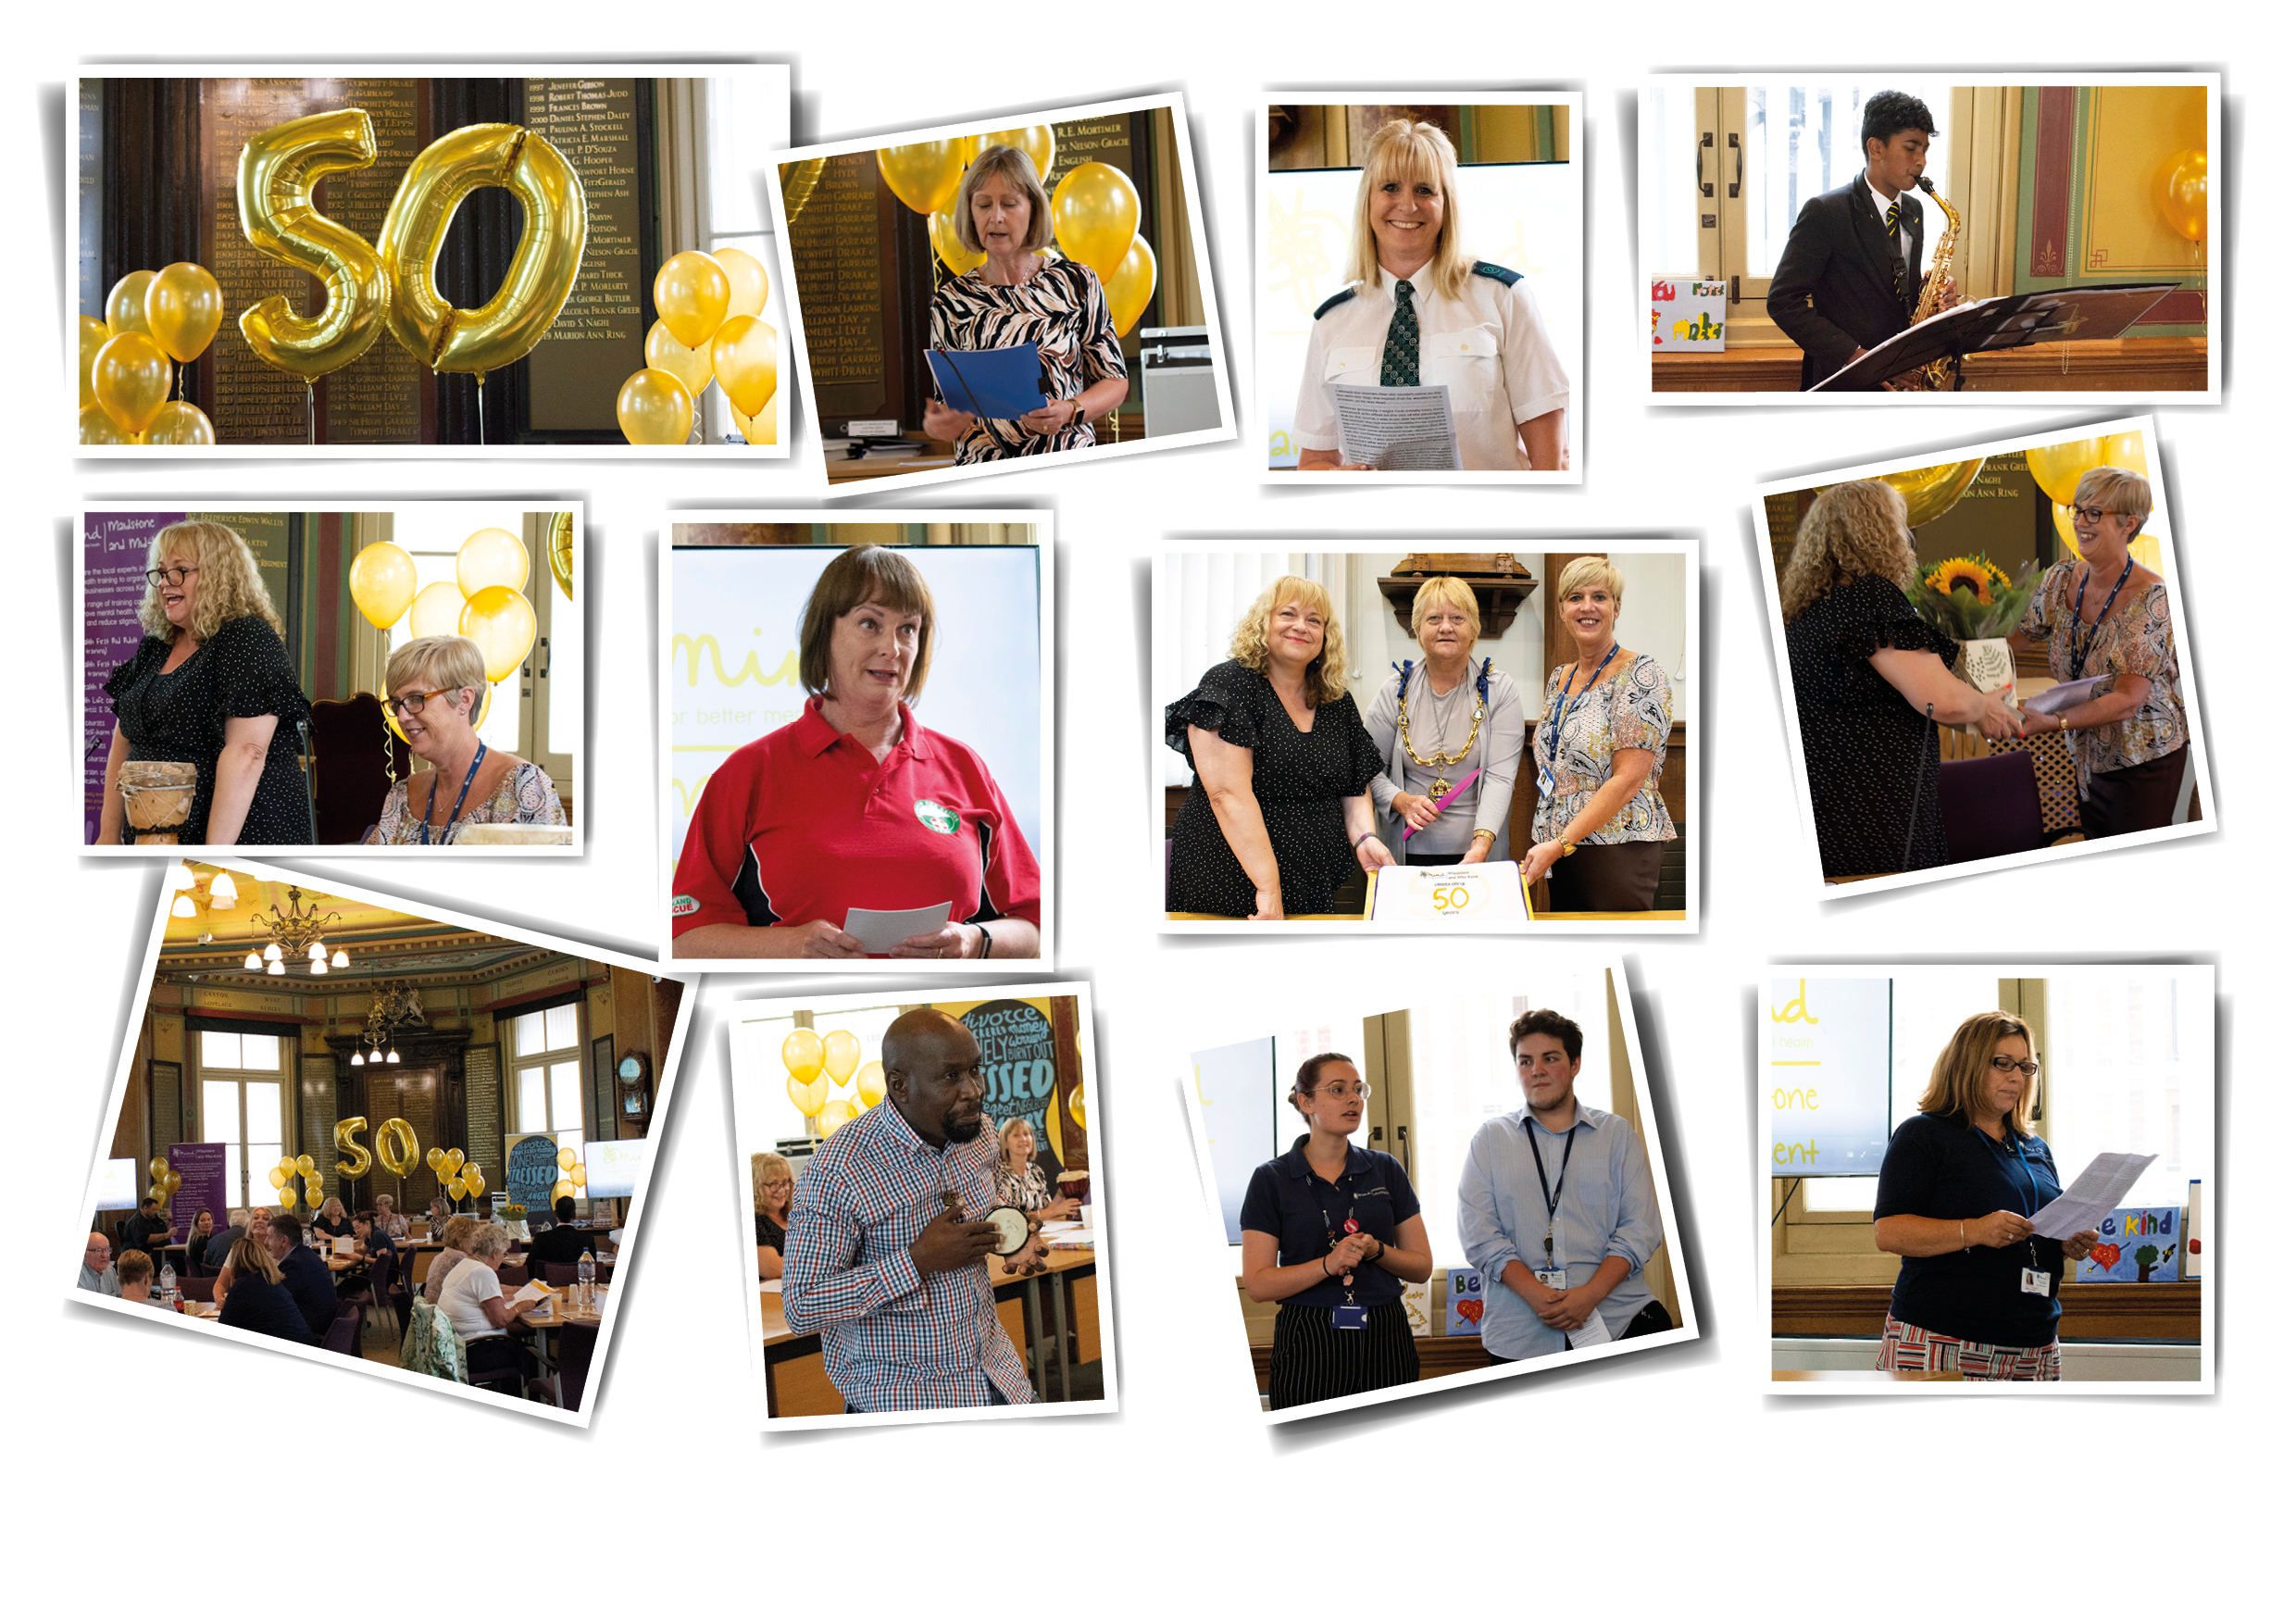 2019 AGM in Maidstone - Top left, 50th Anniversary Balloons. Picture of Hazel Webb, trustee and finance officer. Picture of Sarah, from Arriva, who spoke about how Suicide Prevention training had helped her. Picture of Kamren, from MGS, who played music for us. Picture of Sue and Julie at head table. Picture of Paula, from Kent Search and Rescue. Picture of Sue Grigg, Maidstone Mayor and Julie Blackmore. Picture of Julie and Sue exchanging flowers. Picture of room full for the AGM. Picture of Lucky playing music. Picture of Nicole and Tom. Picture of Suzanne. 